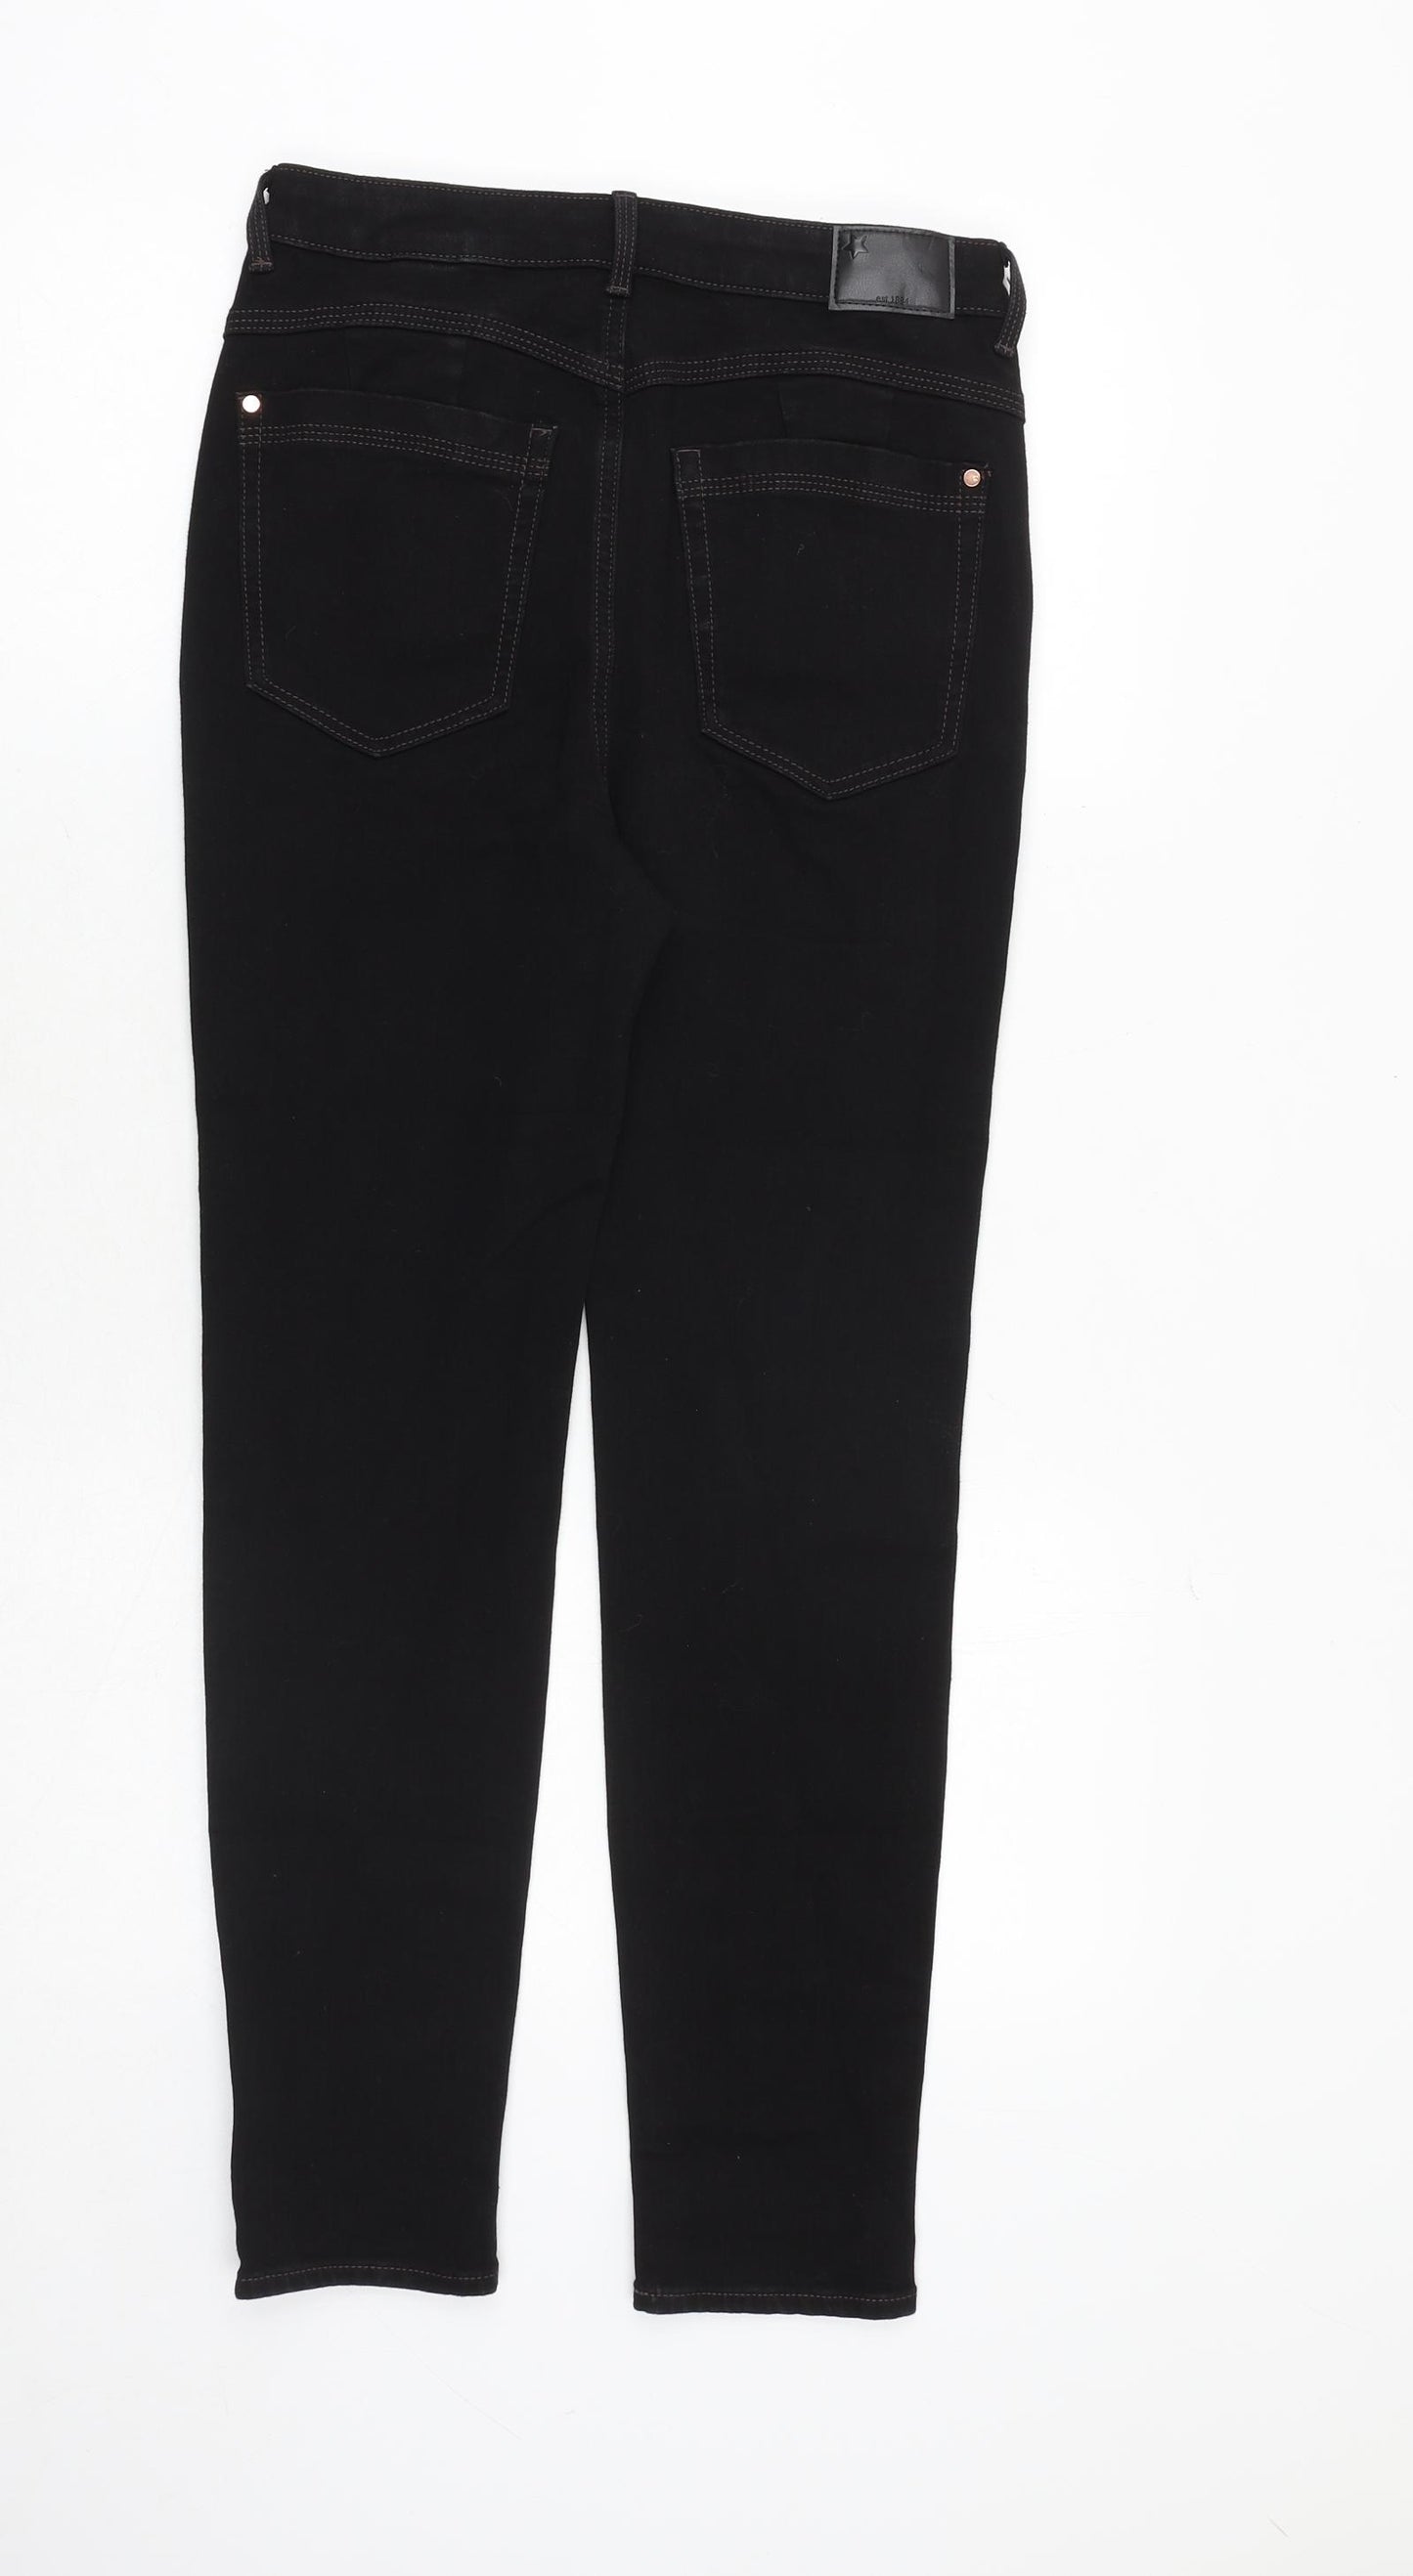 Marks and Spencer Womens Black Cotton Skinny Jeans Size 10 Regular Zip